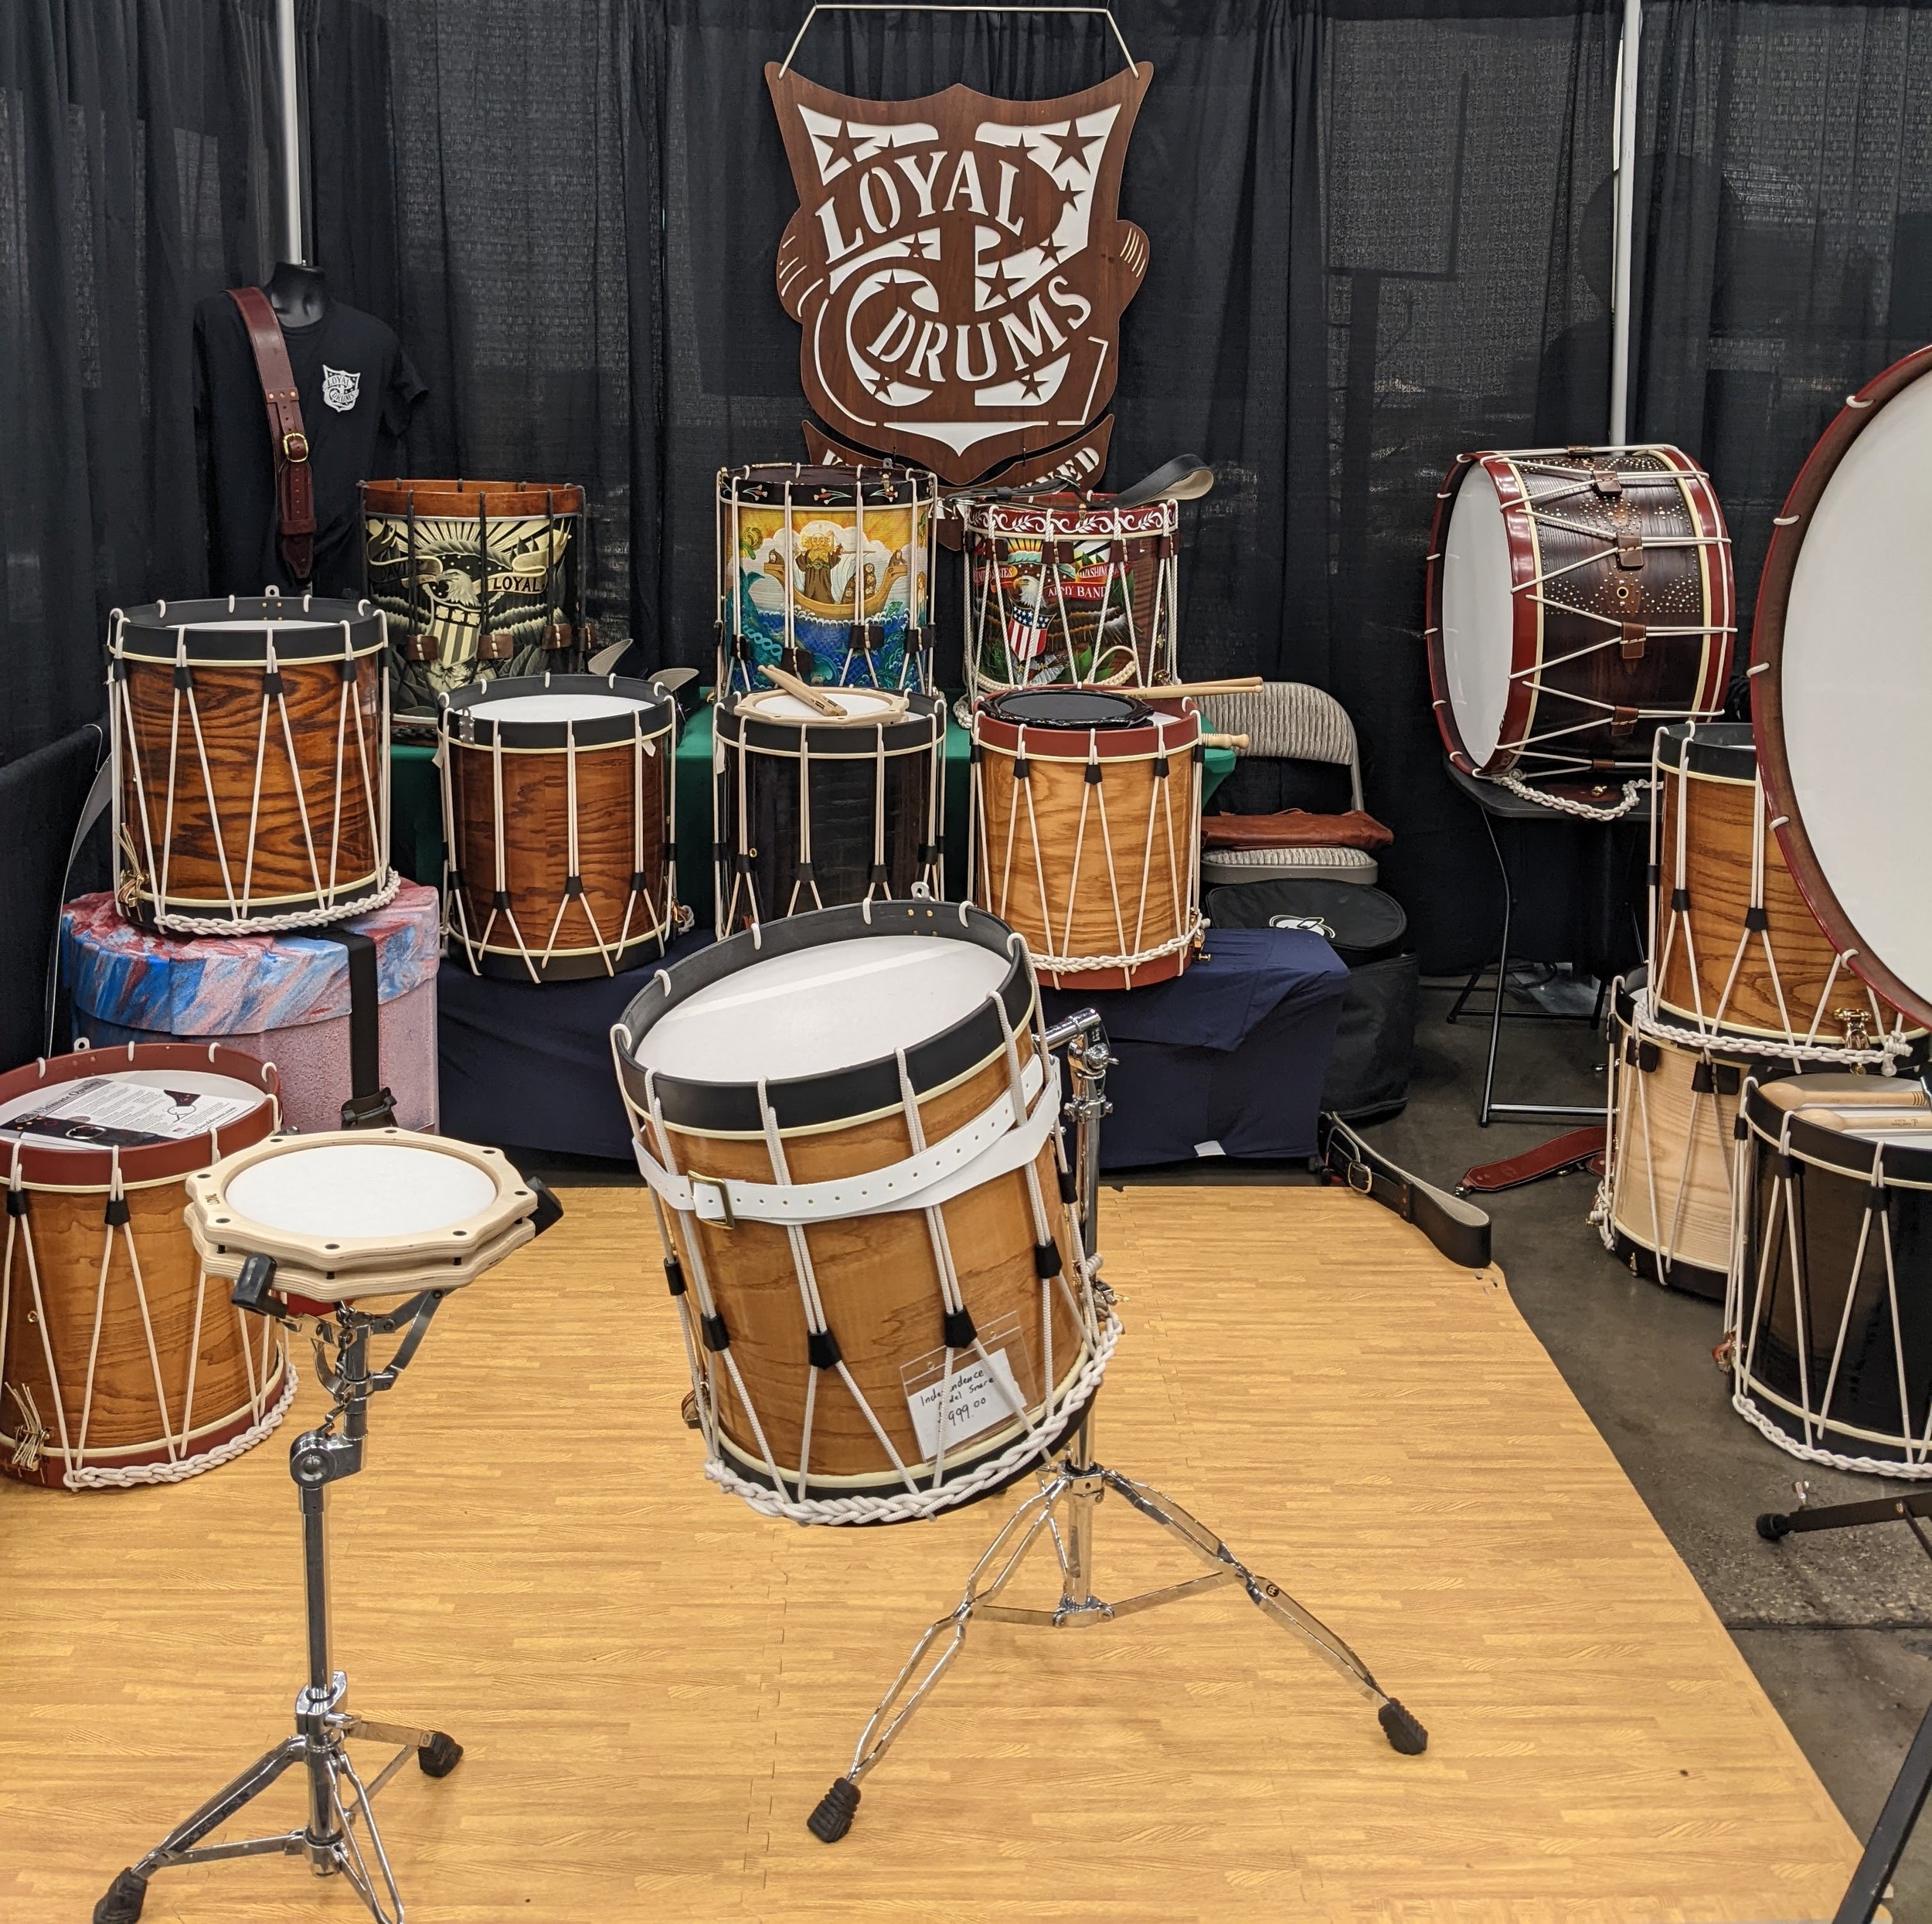 Loyal Drums Booth